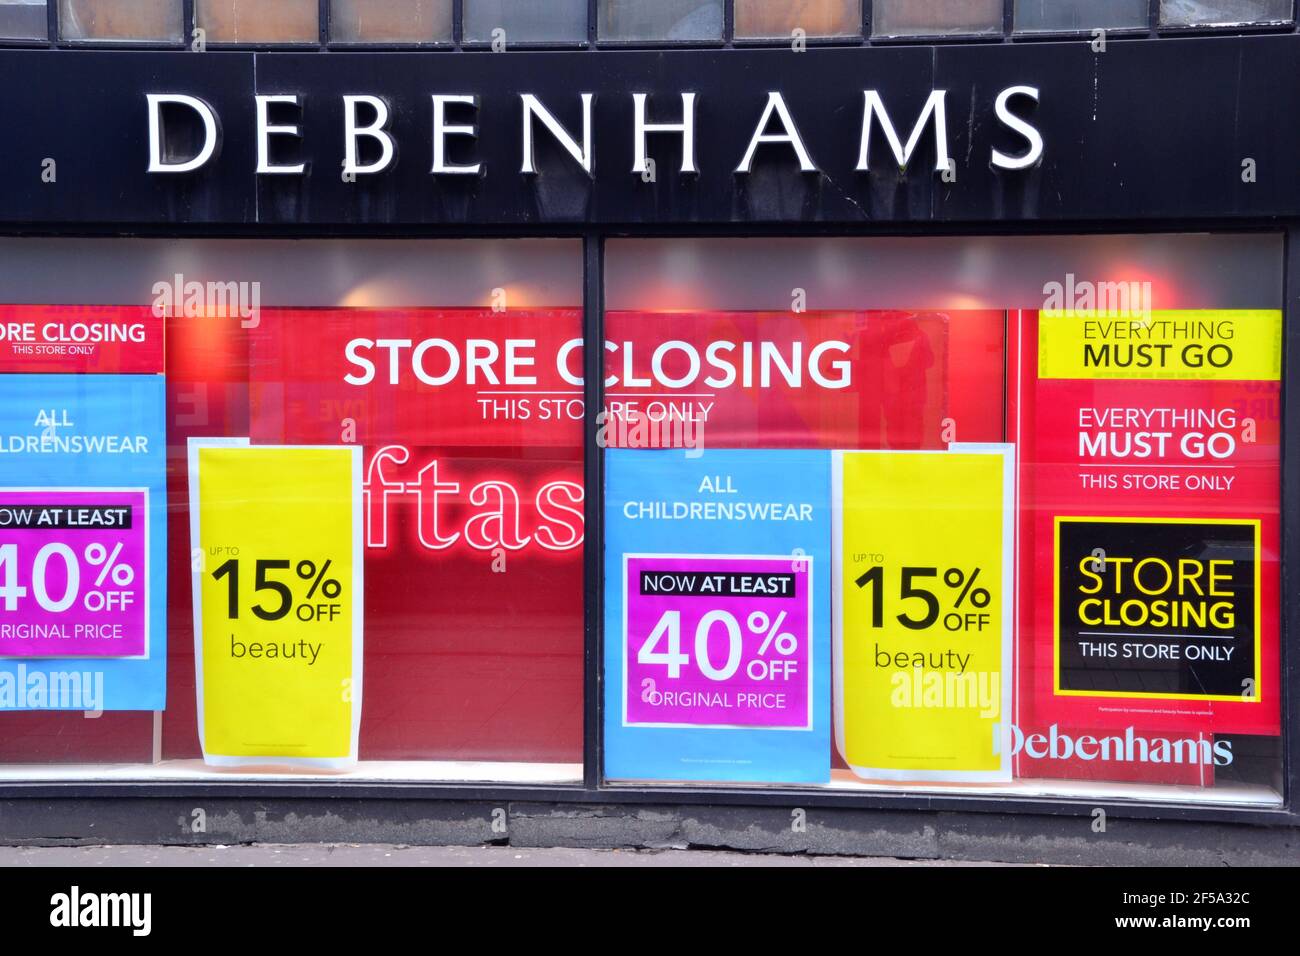 A window of a Debenhams store in Manchester, Greater Manchester, England, United Kingdom, which displays 'store closing', 'everything must go' posters Stock Photo